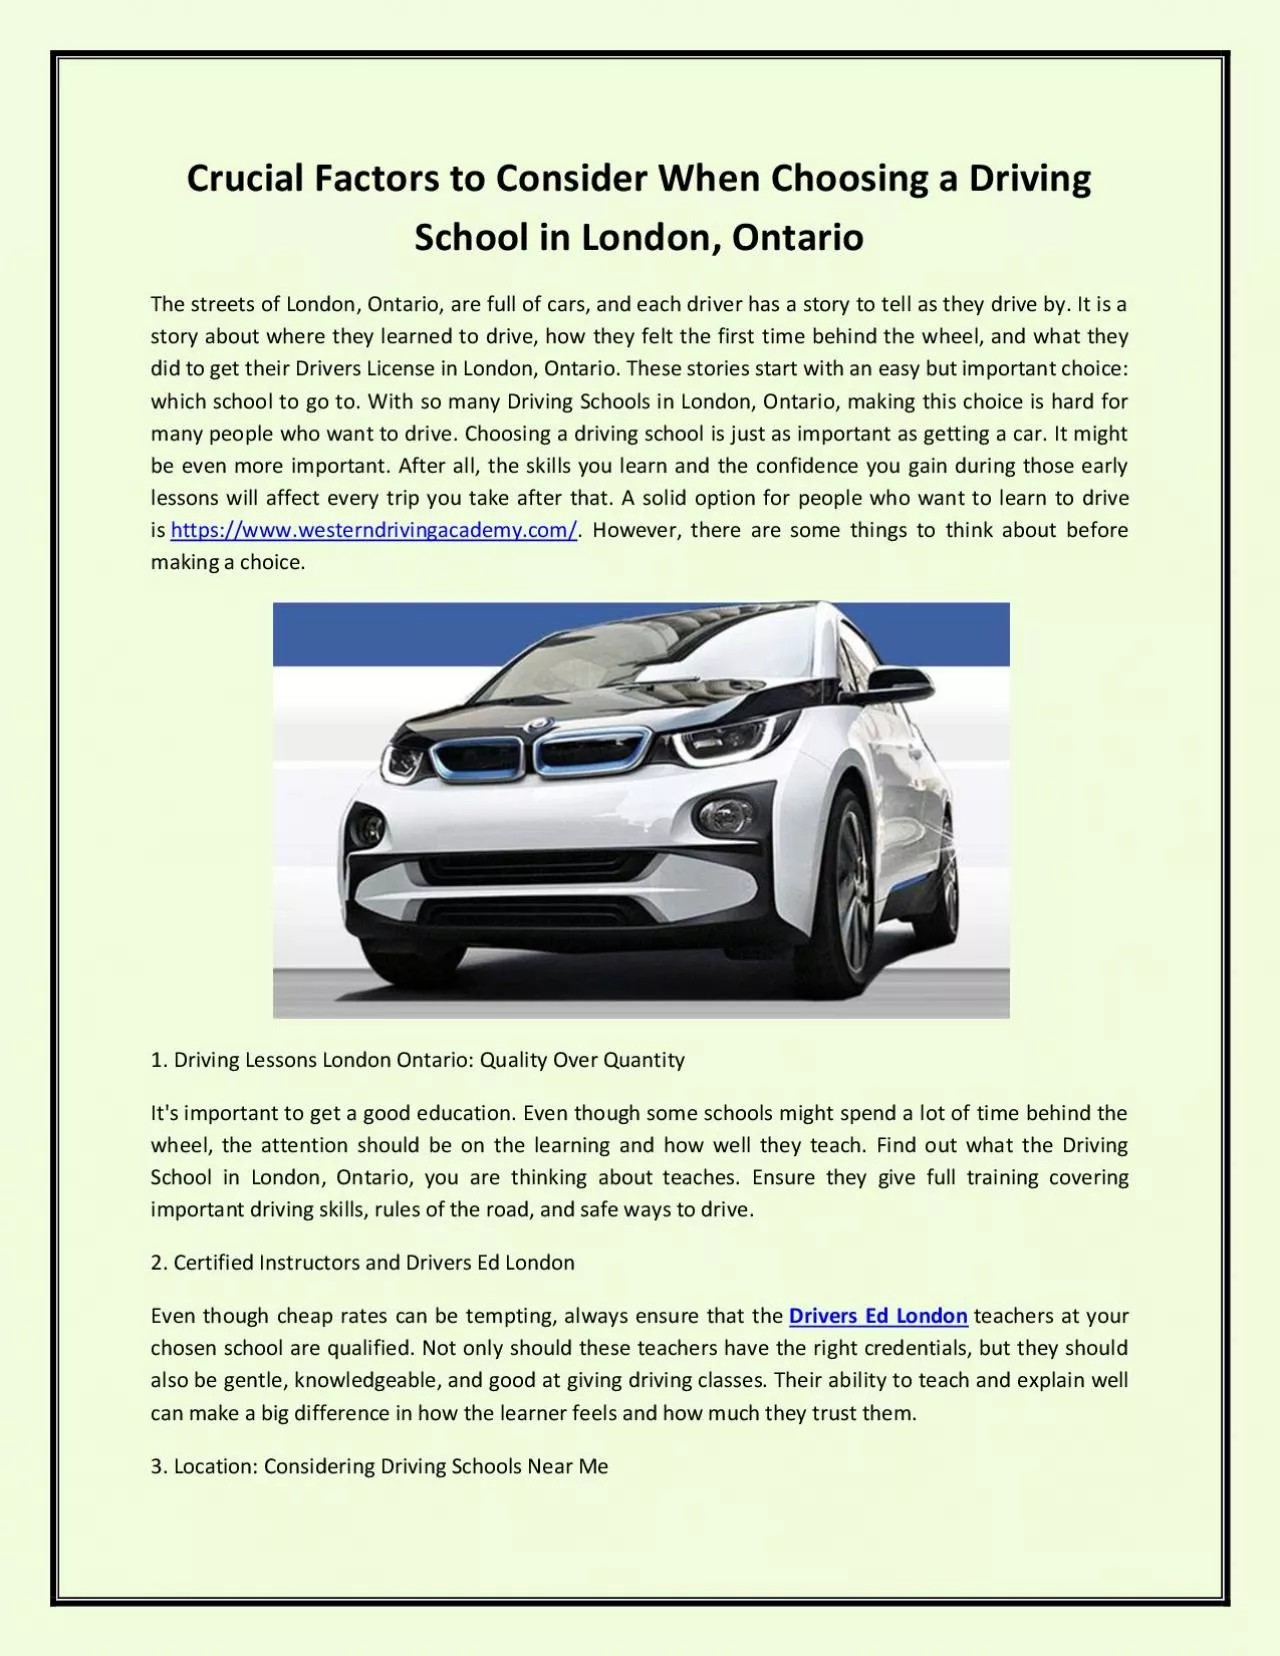 Crucial Factors to Consider When Choosing a Driving School in London, Ontario